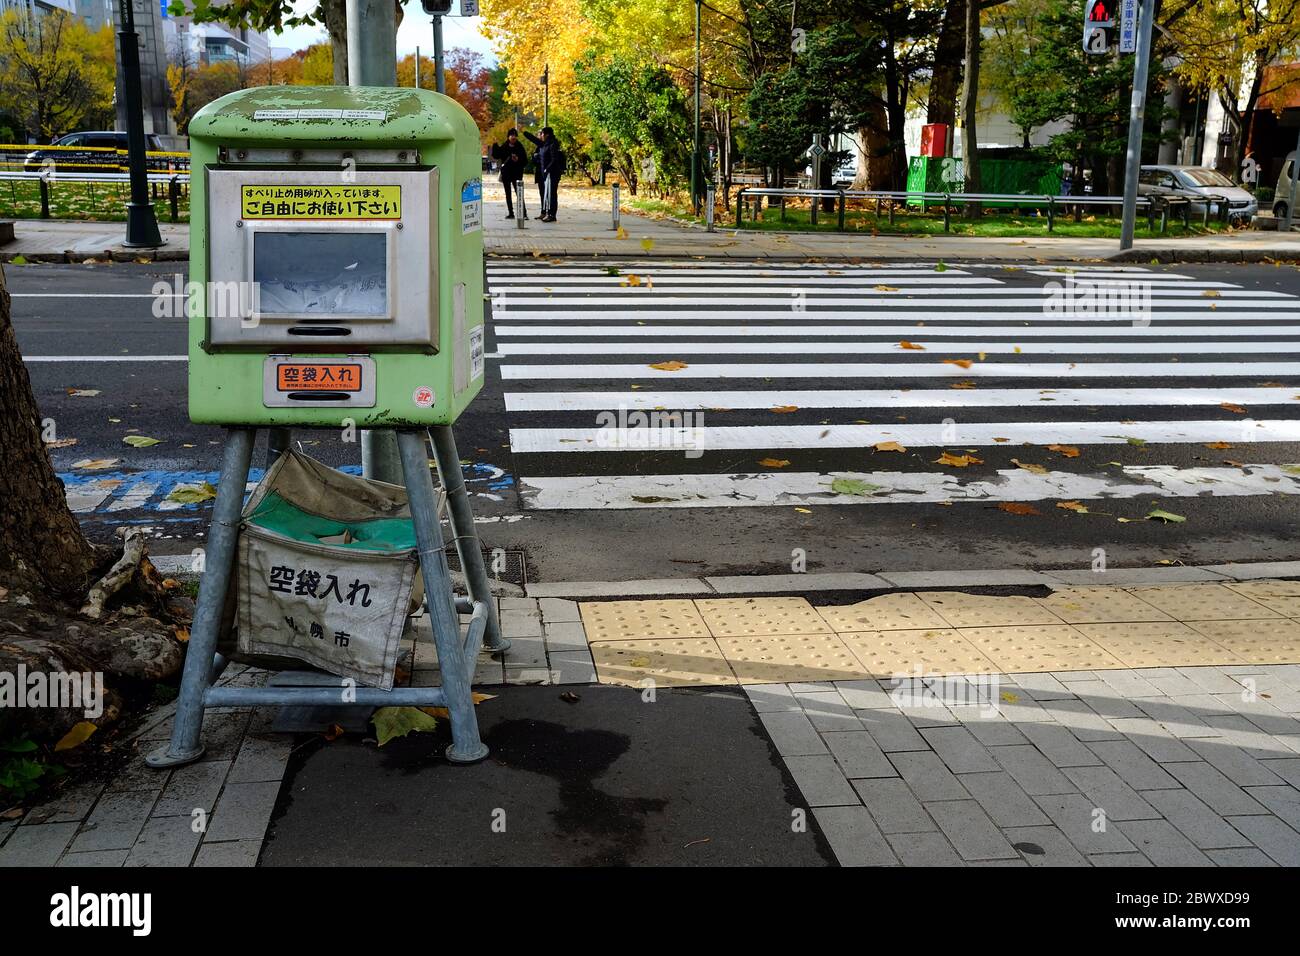 Sapporo Japan November 12 19 Anti Slip Sand Box That Filled With Sand Or Gravel Bag That People Take And Sprinkle Them On Slippery Ground Befor Stock Photo Alamy